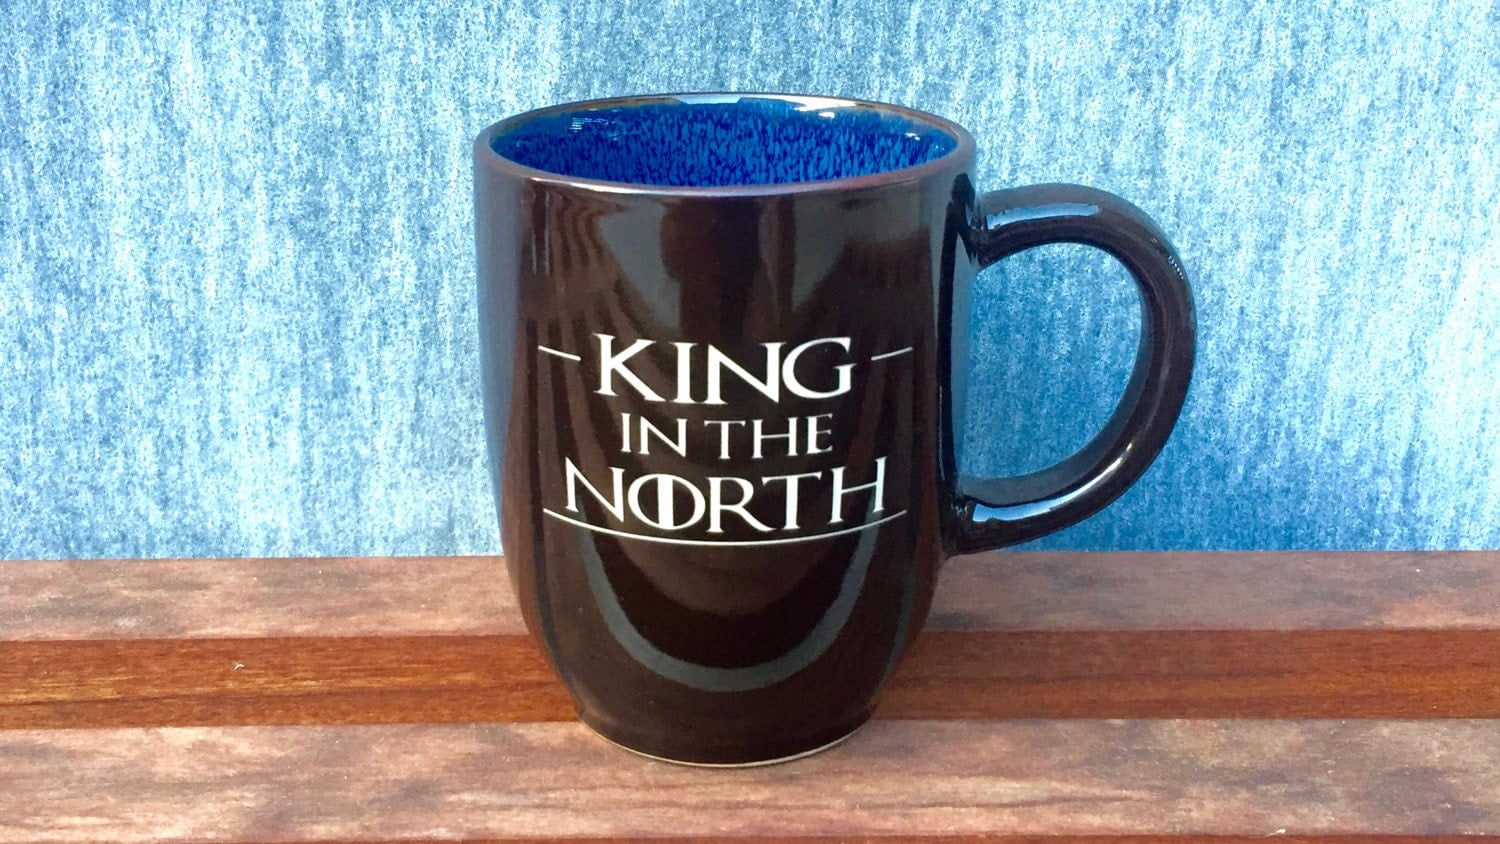 Game of Thrones Coffee Mug with King in the North Quote, Choose your favorite quote